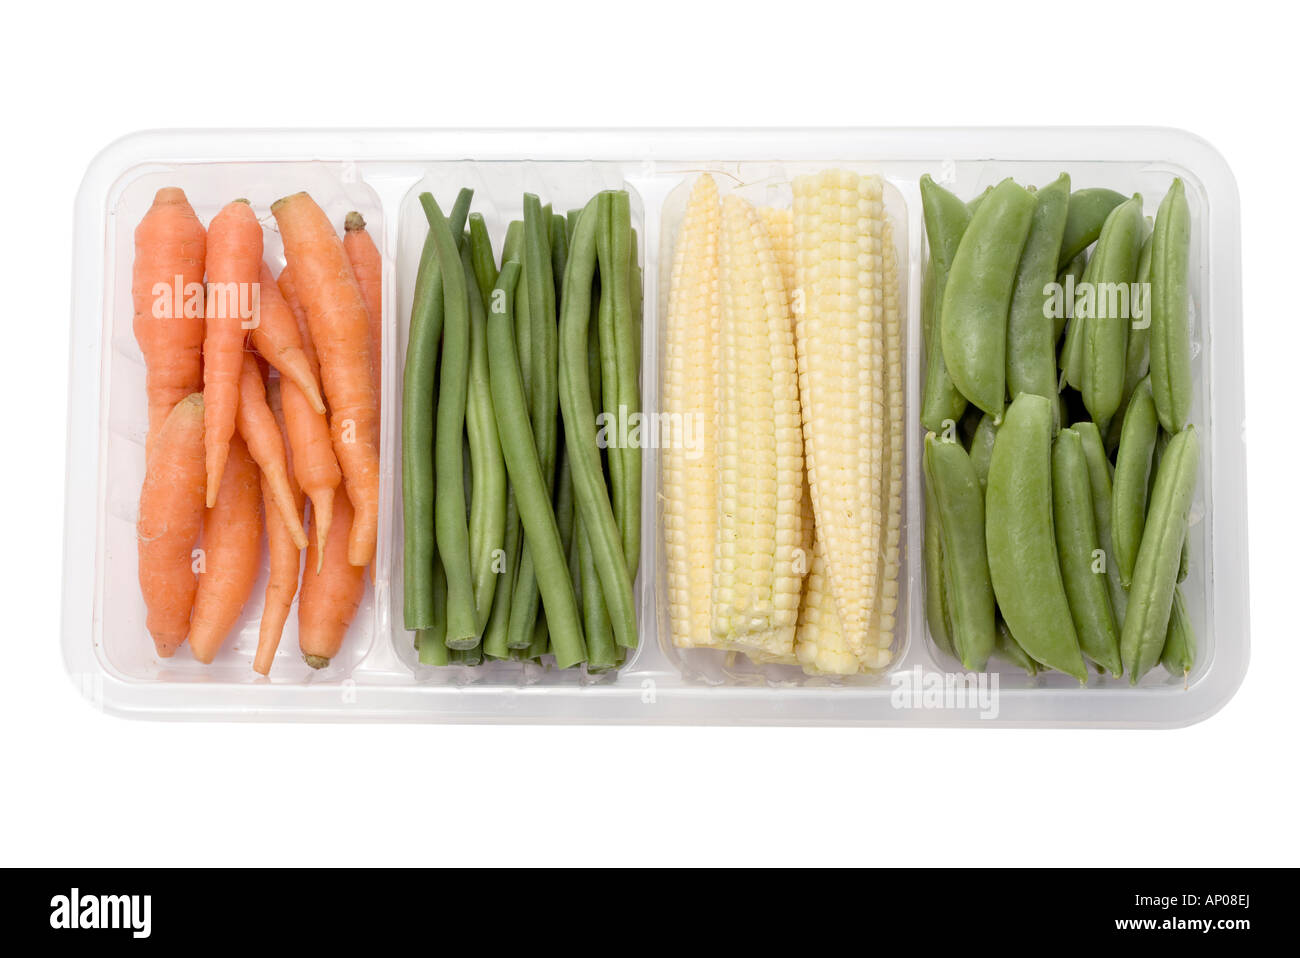 Mixed veg in a plastic tray Stock Photo